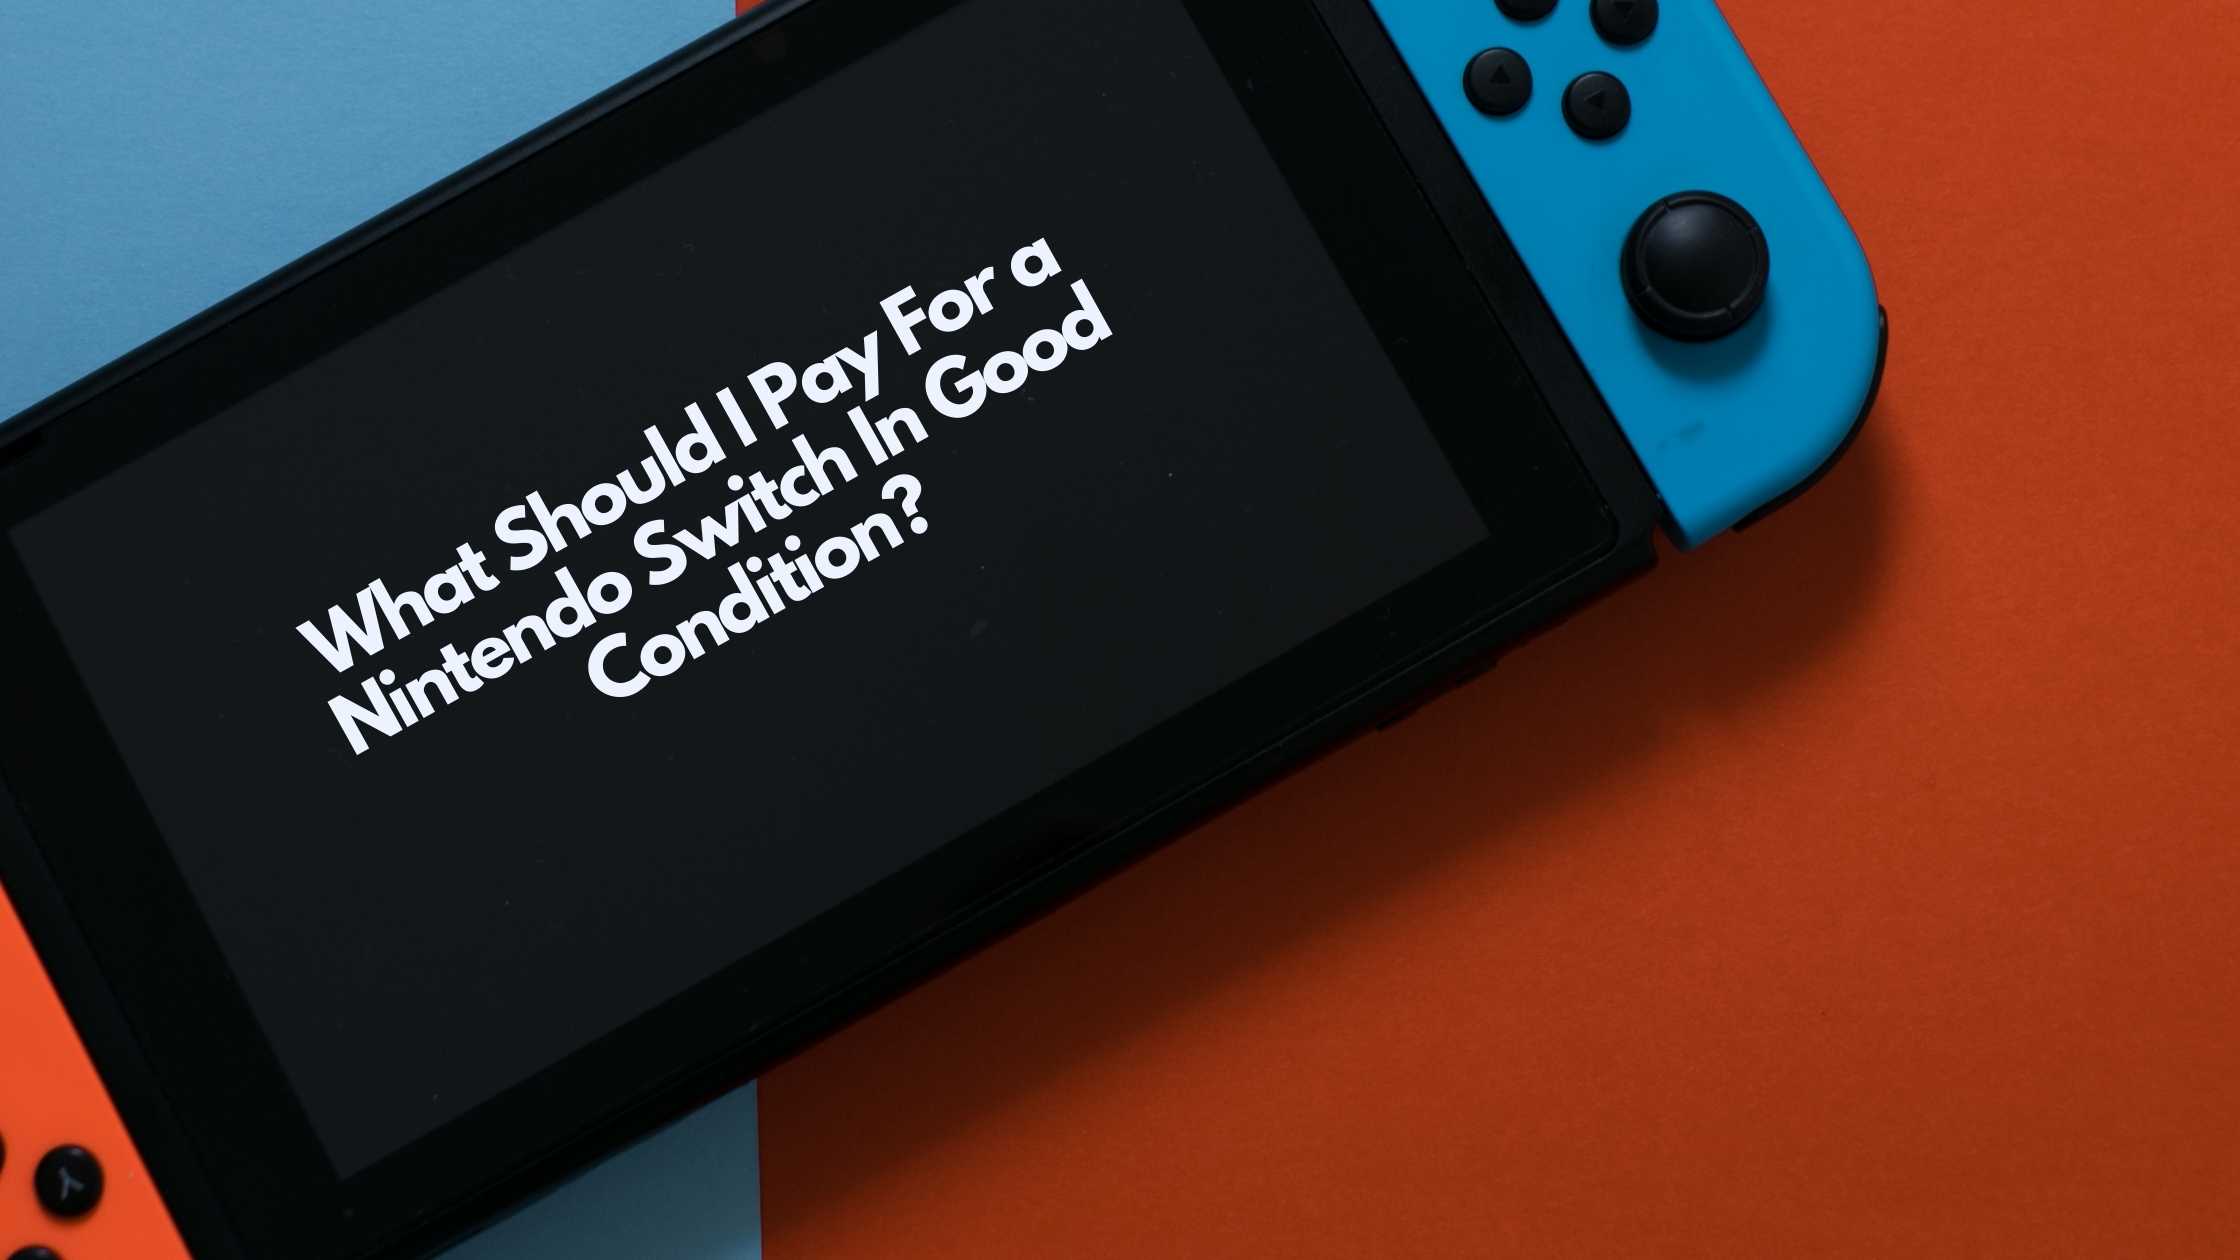 What Should I pay For A Nintendo Switch In Good Condition?